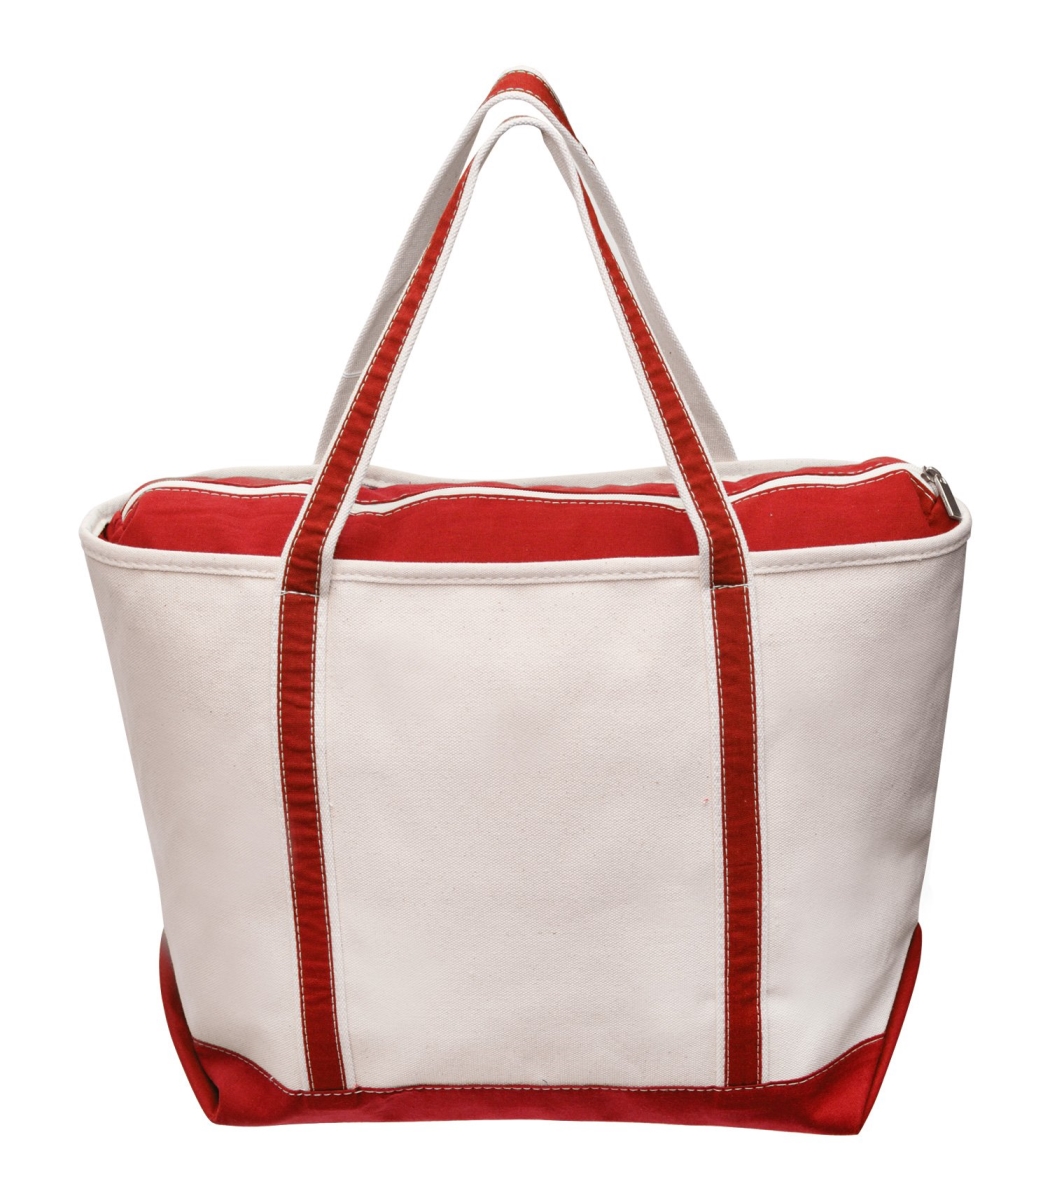 Can02z-red Large Zippered Saling Tote - Natural & Red